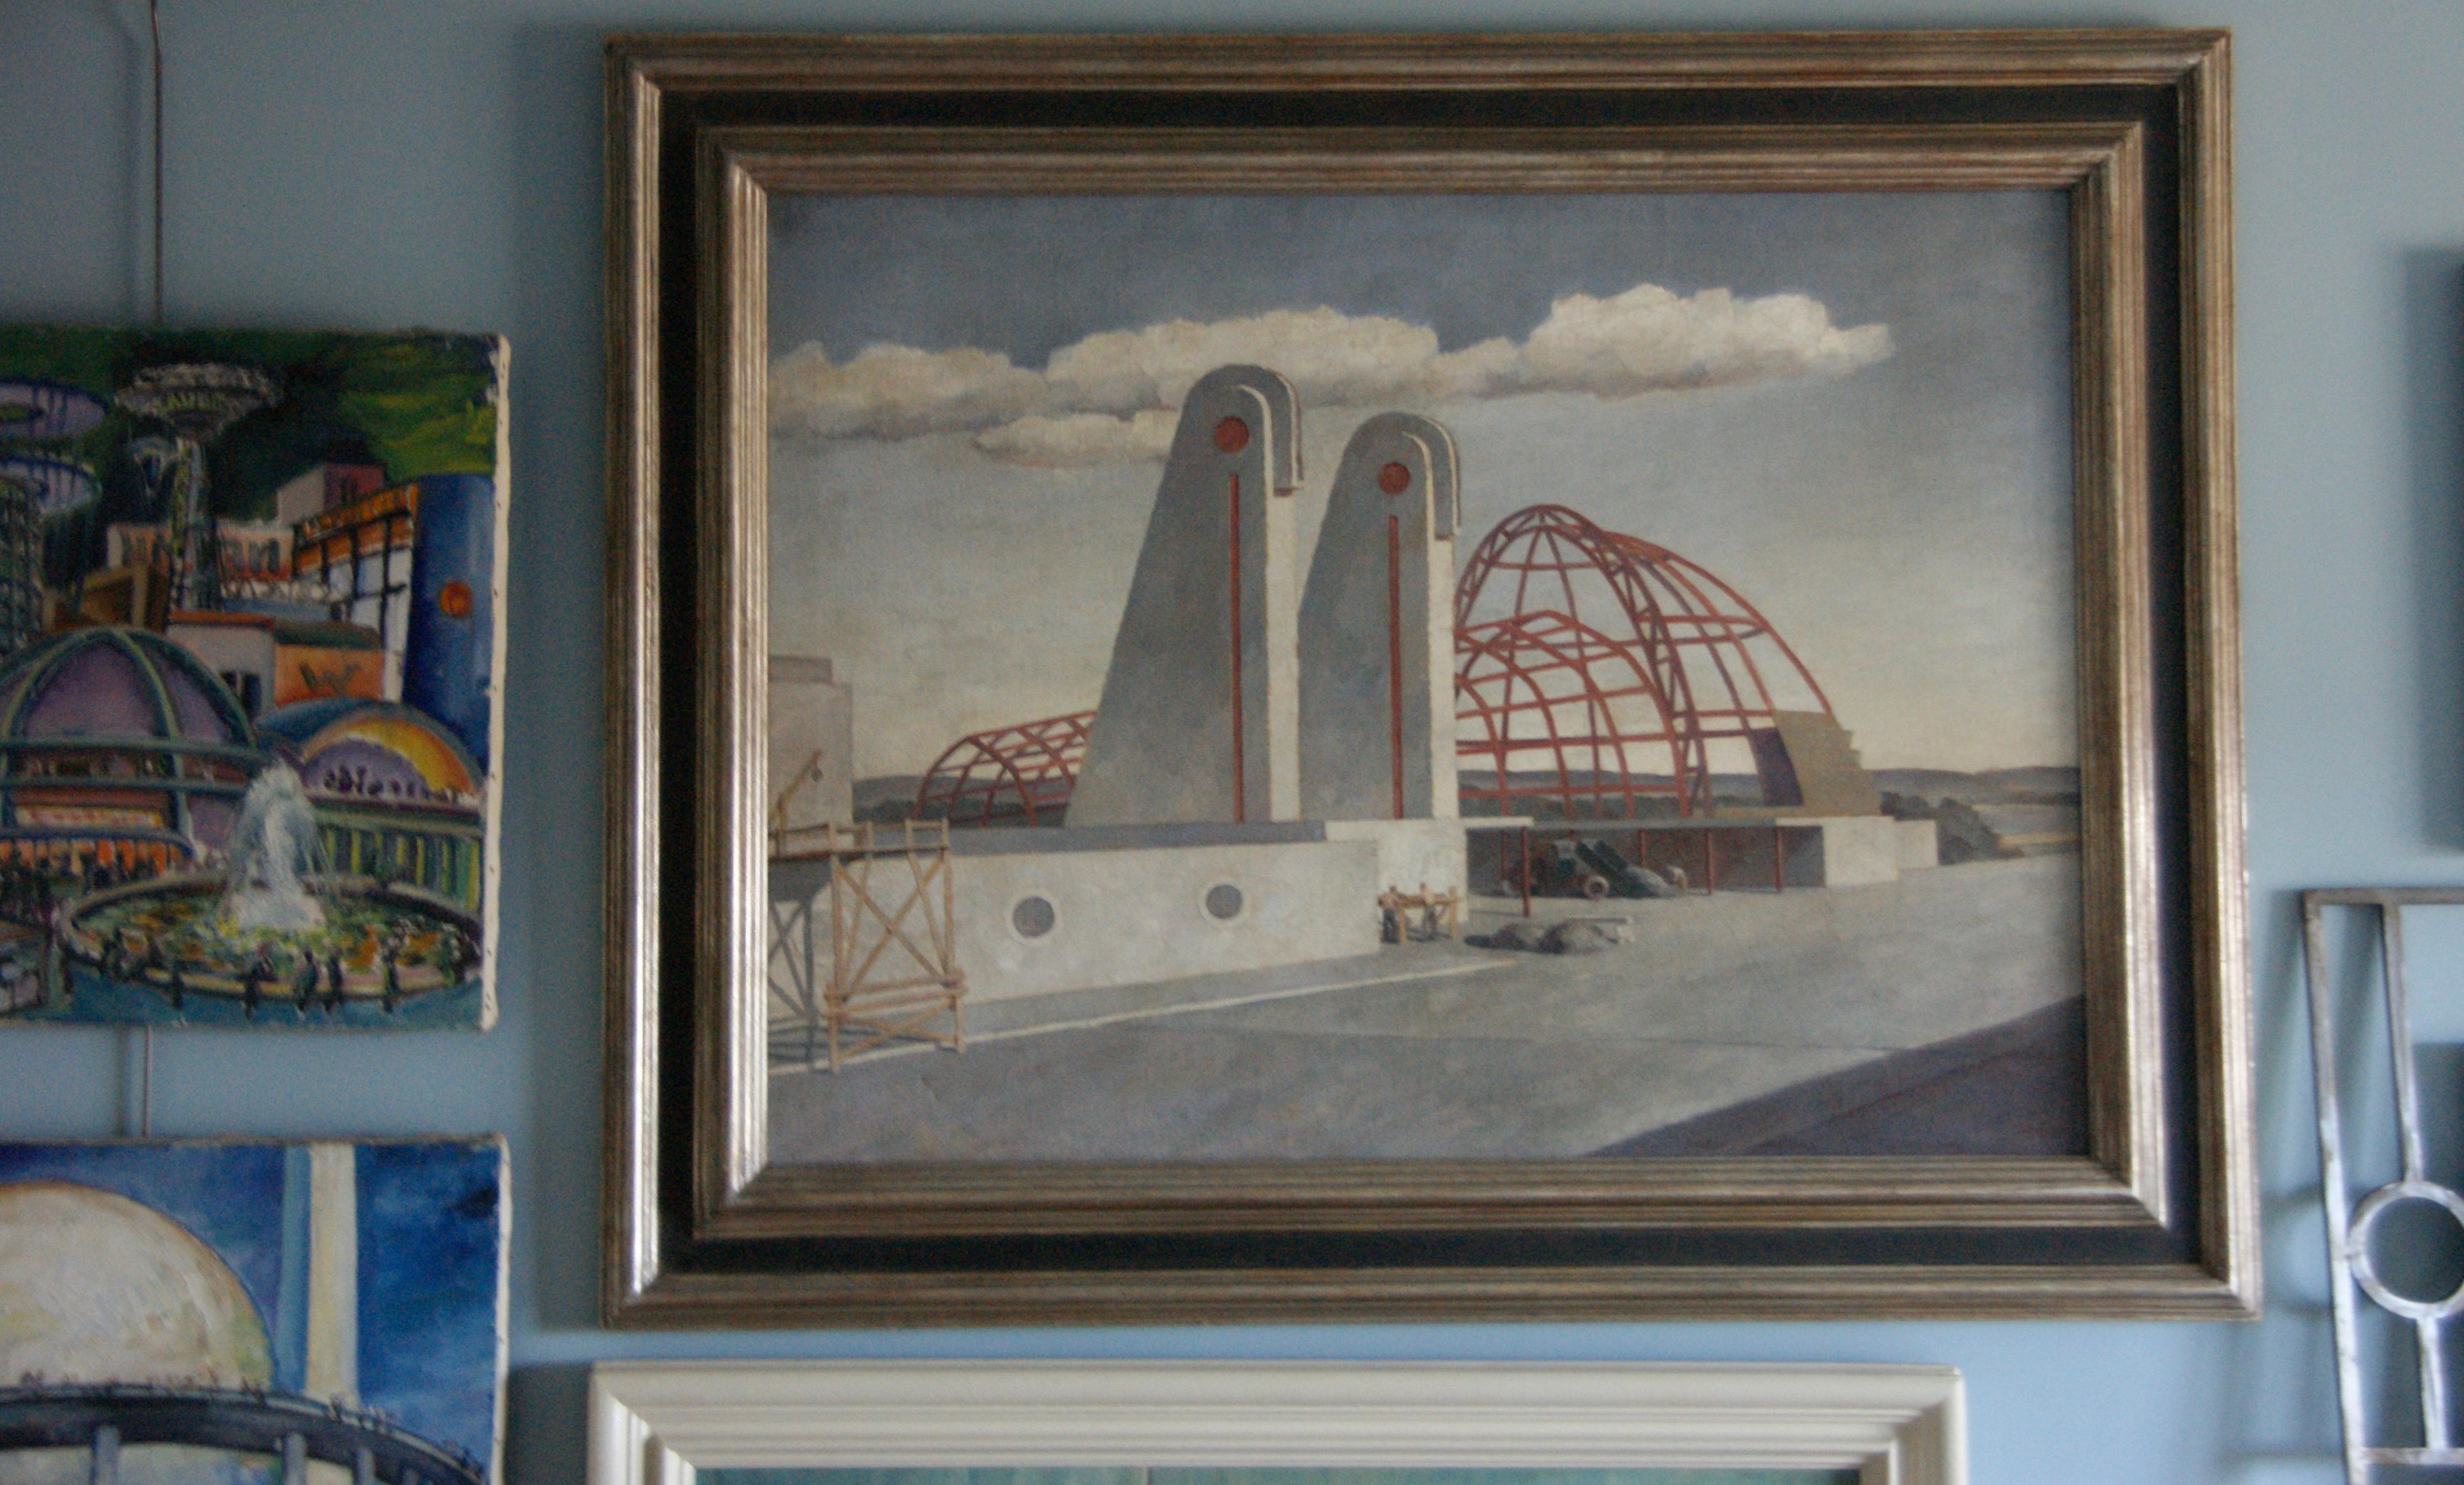 1, 000 piece Museum Quality Collection of Art & Objects from NYC 1939 Worlds Fair - Painting by Harry Lane